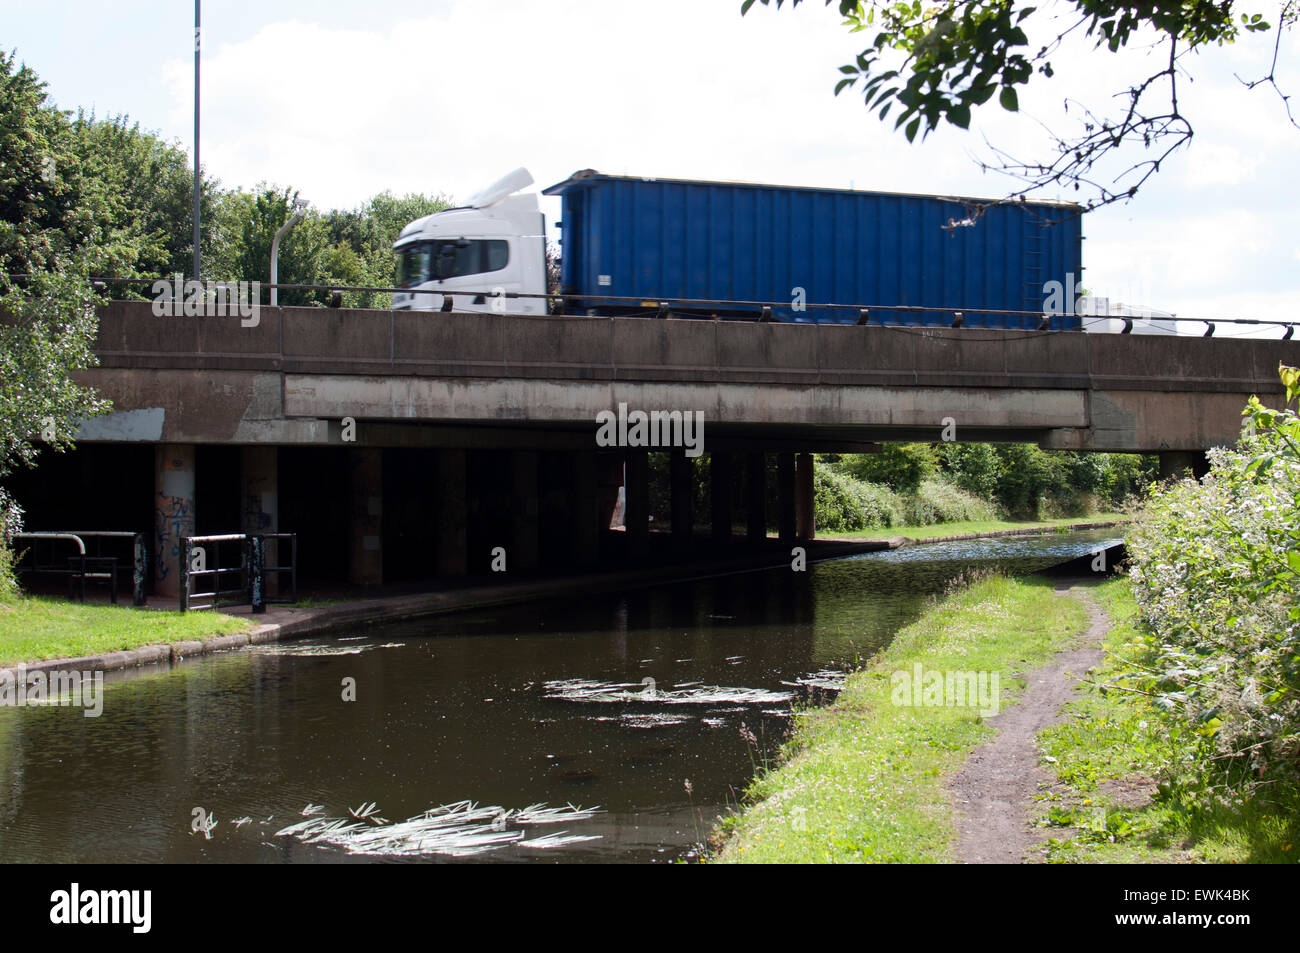 M6 motorway flyover at Perry Barr Locks, Tame Valley Canal, Perry Barr, Birmingham, UK Stock Photo